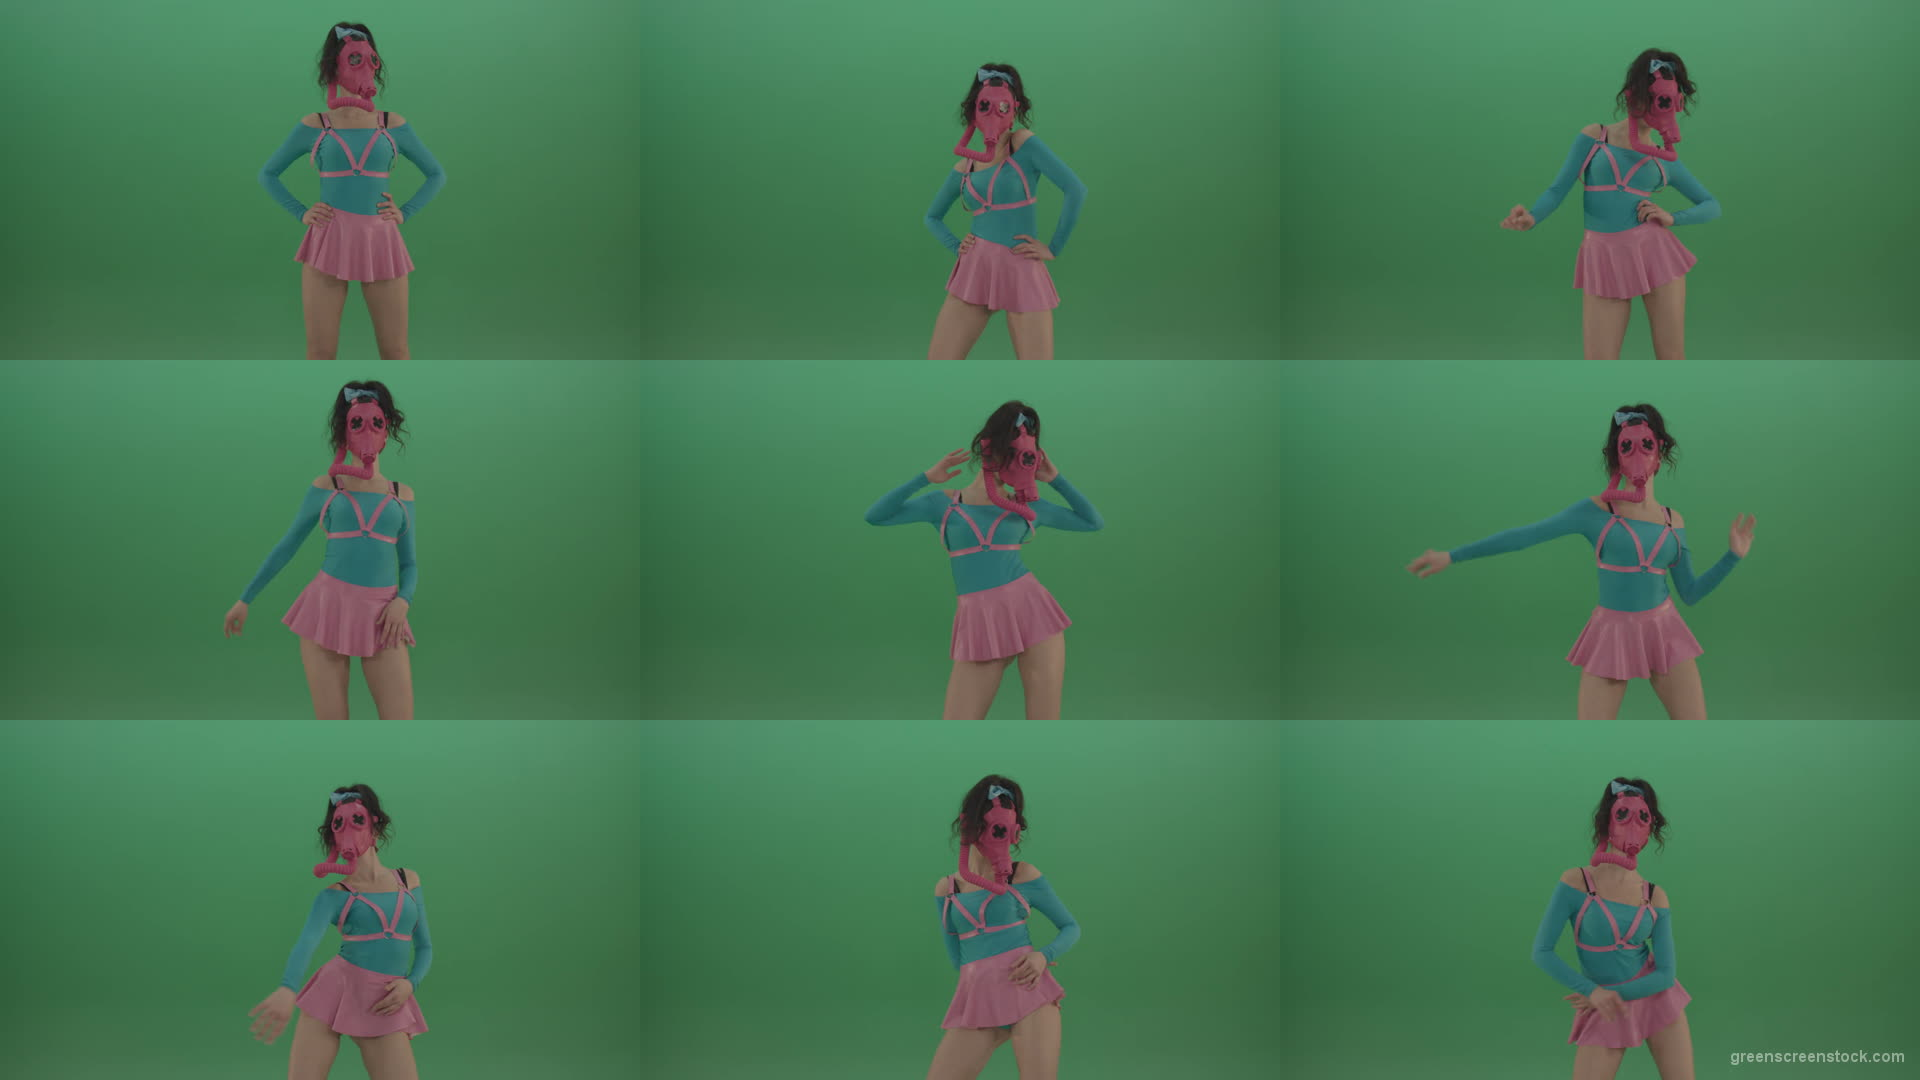 Go-Go-Dancing-Woman-in-Pink-Gas-Mask-sexy-moving-on-green-screen-4K-Video-Footage-1920 Green Screen Stock